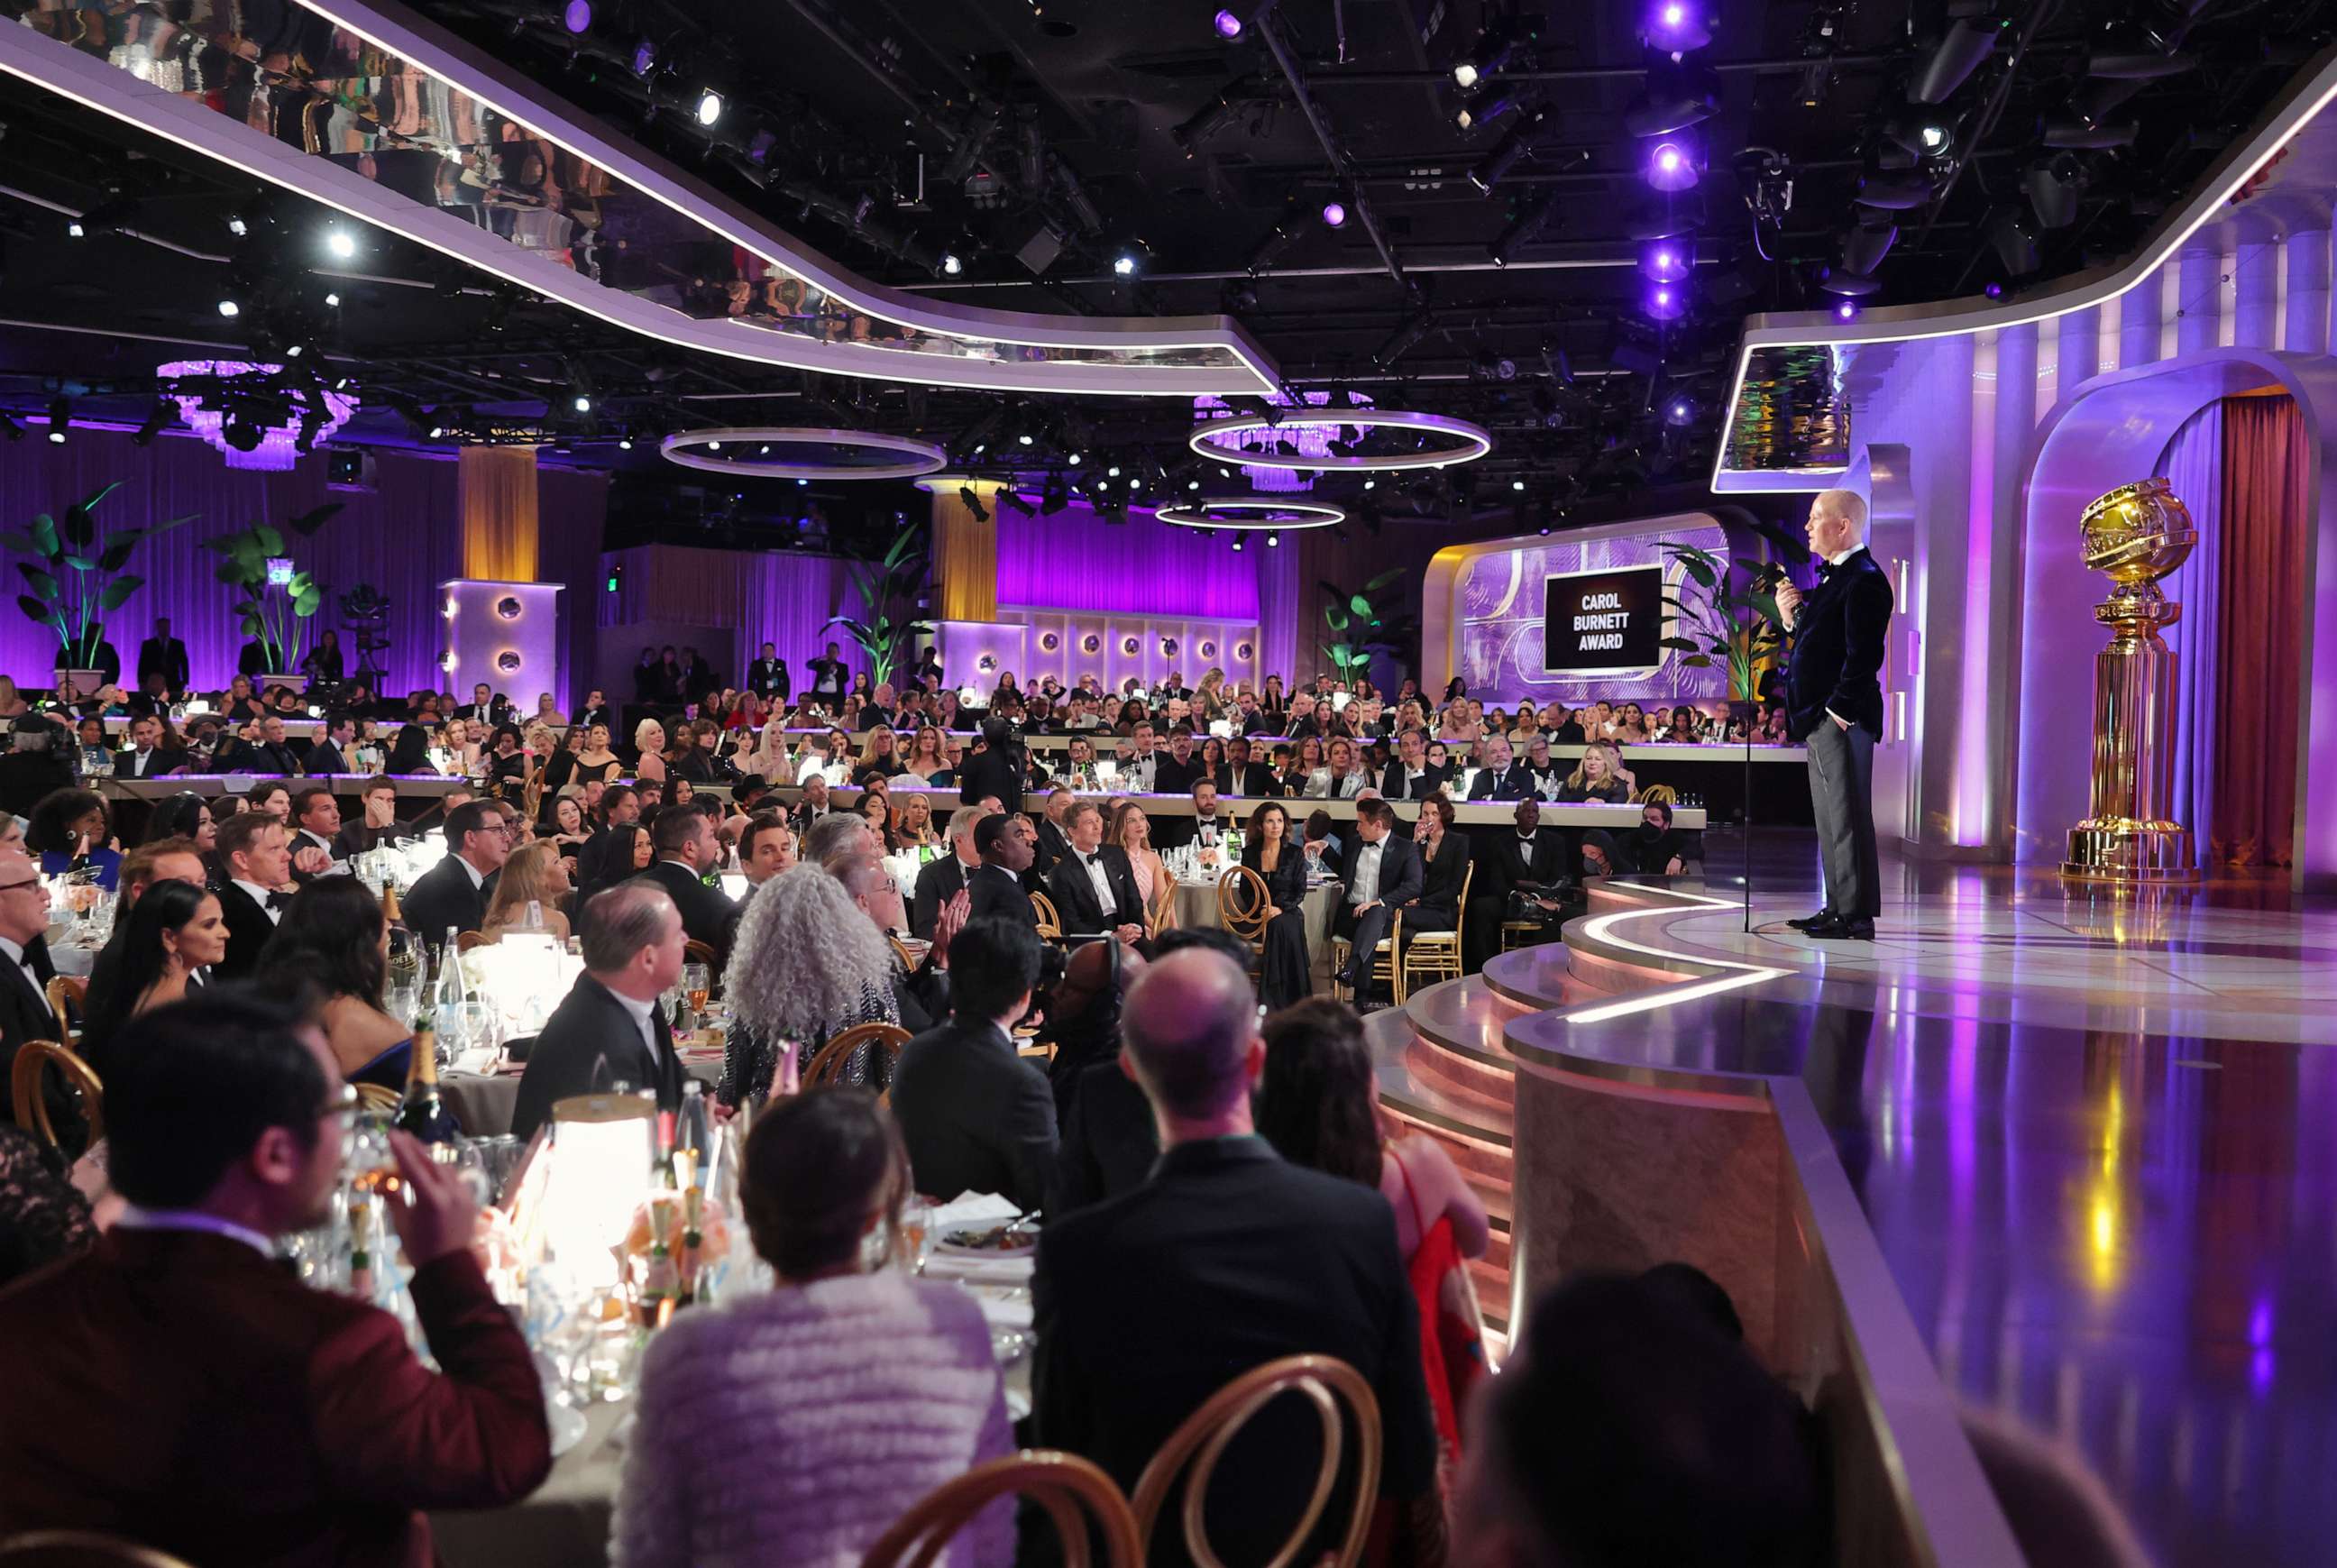 PHOTO: Honoree Ryan Murphy accepts the Carol Burnett Award onstage at the 80th Annual Golden Globe Awards held at the Beverly Hilton Hotel, Jan. 10, 2023, in Los Angeles.